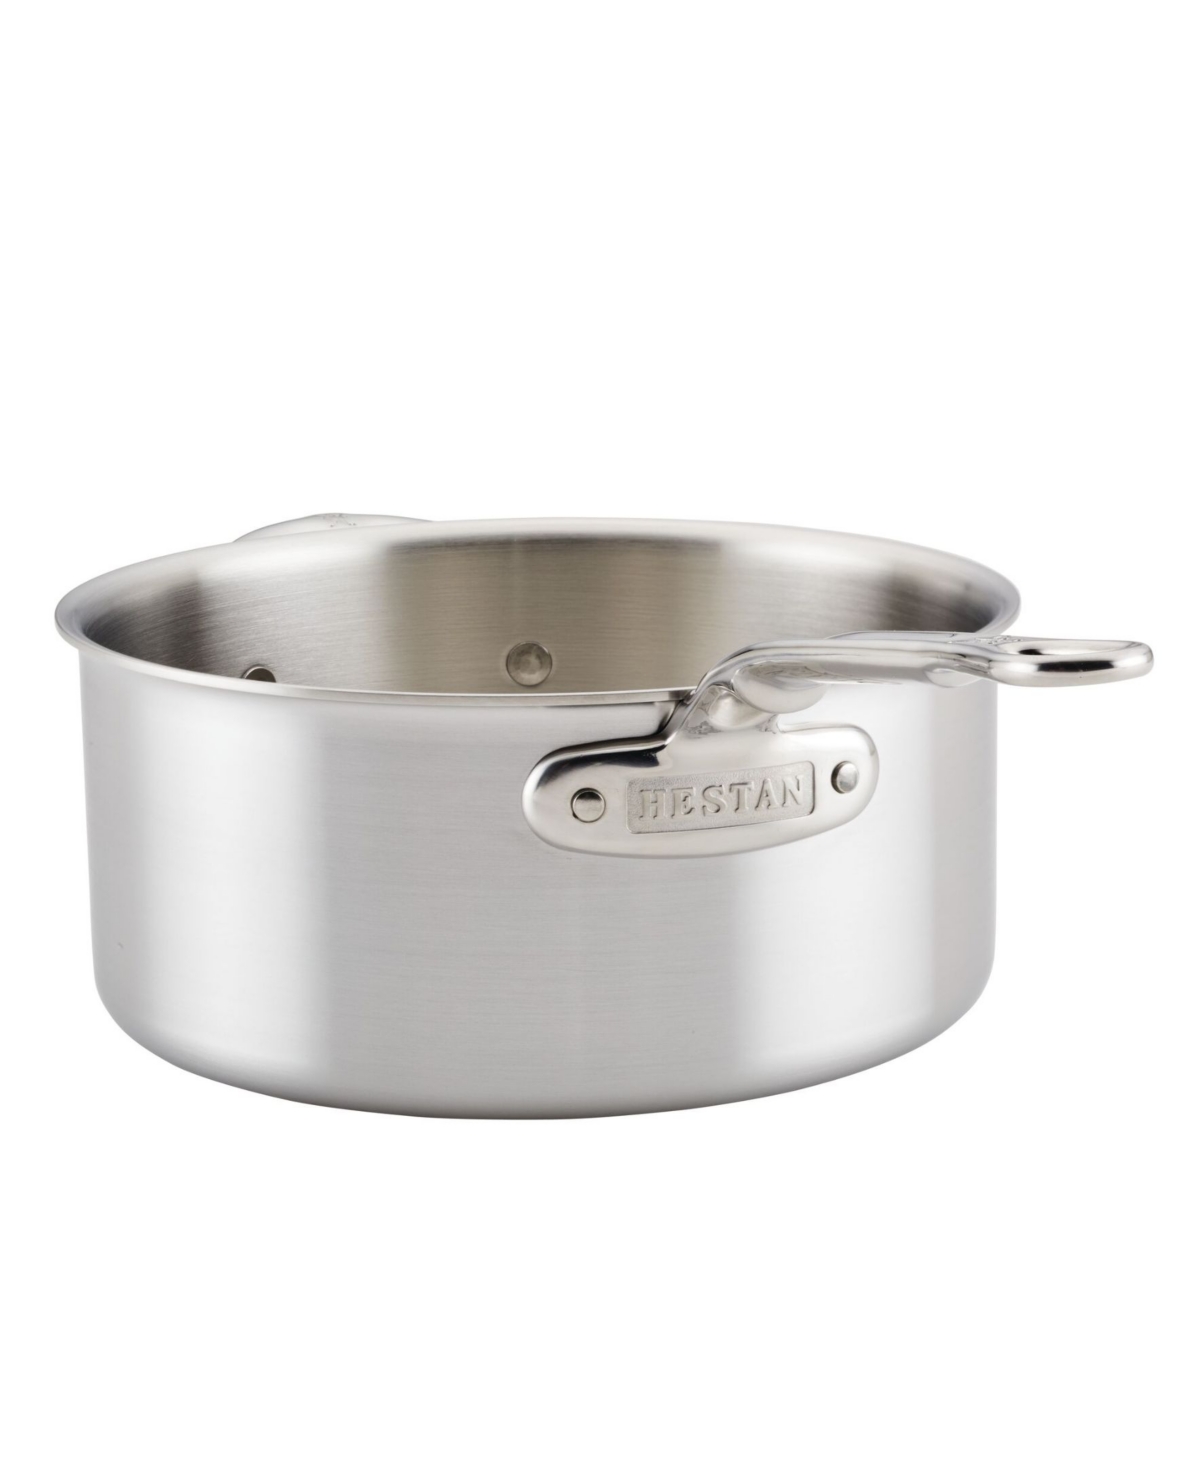 Shop Hestan Thomas Keller Insignia Commercial Clad Stainless Steel 4-quart Open Sauce Pot With Helper Handle In No Color